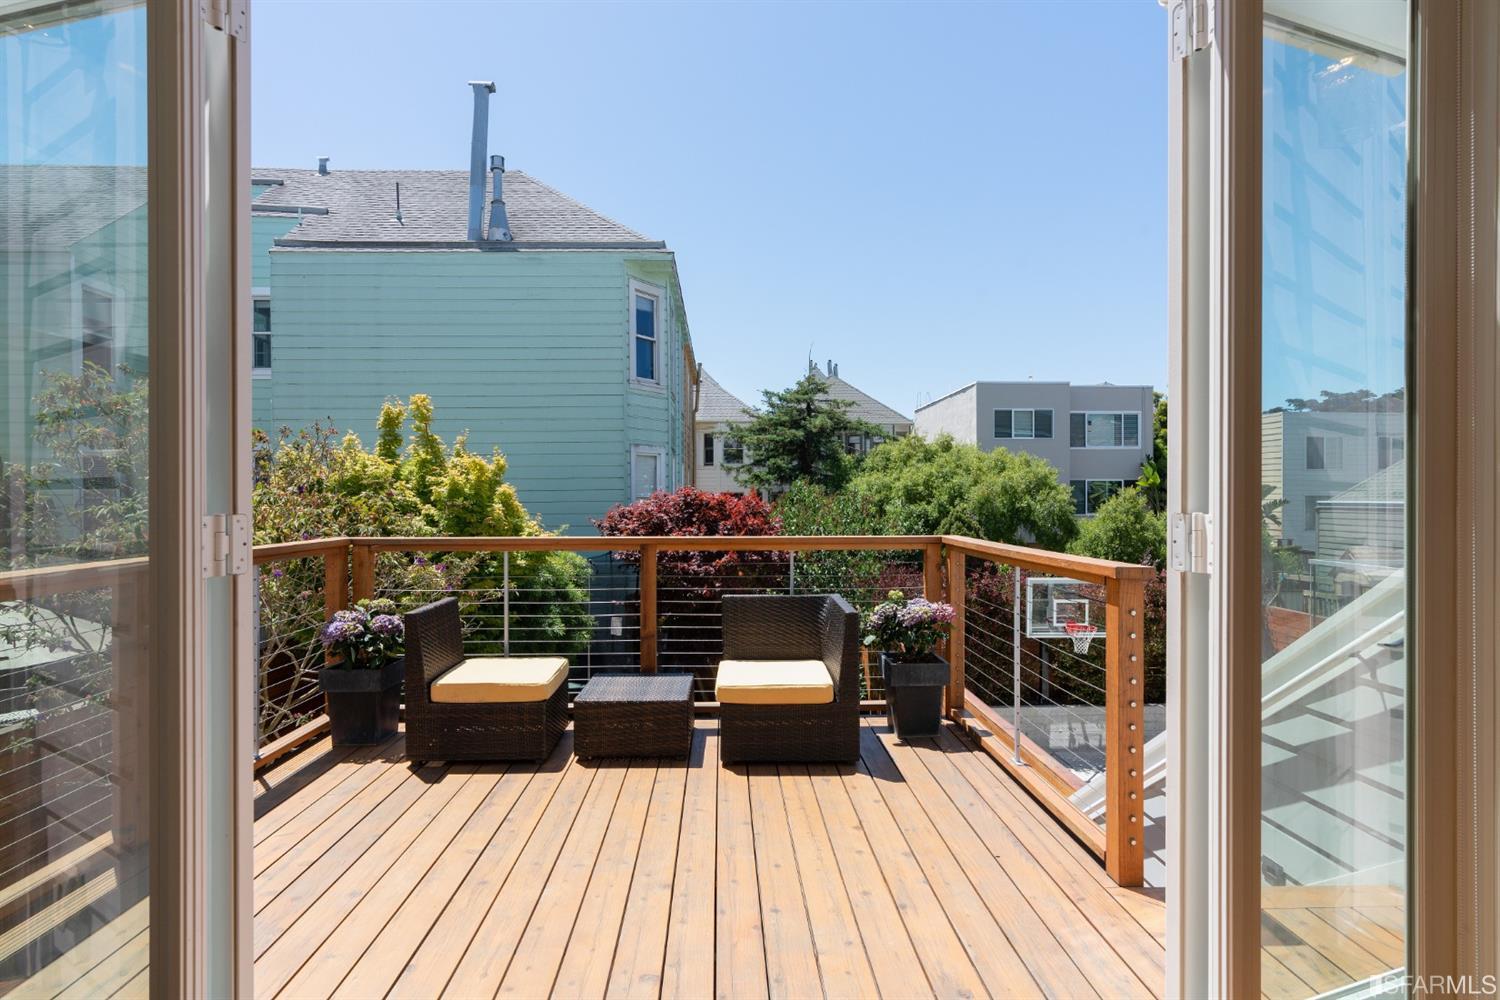 Property Photo: View from open doors of the walk-out deck adjoining the kitchen